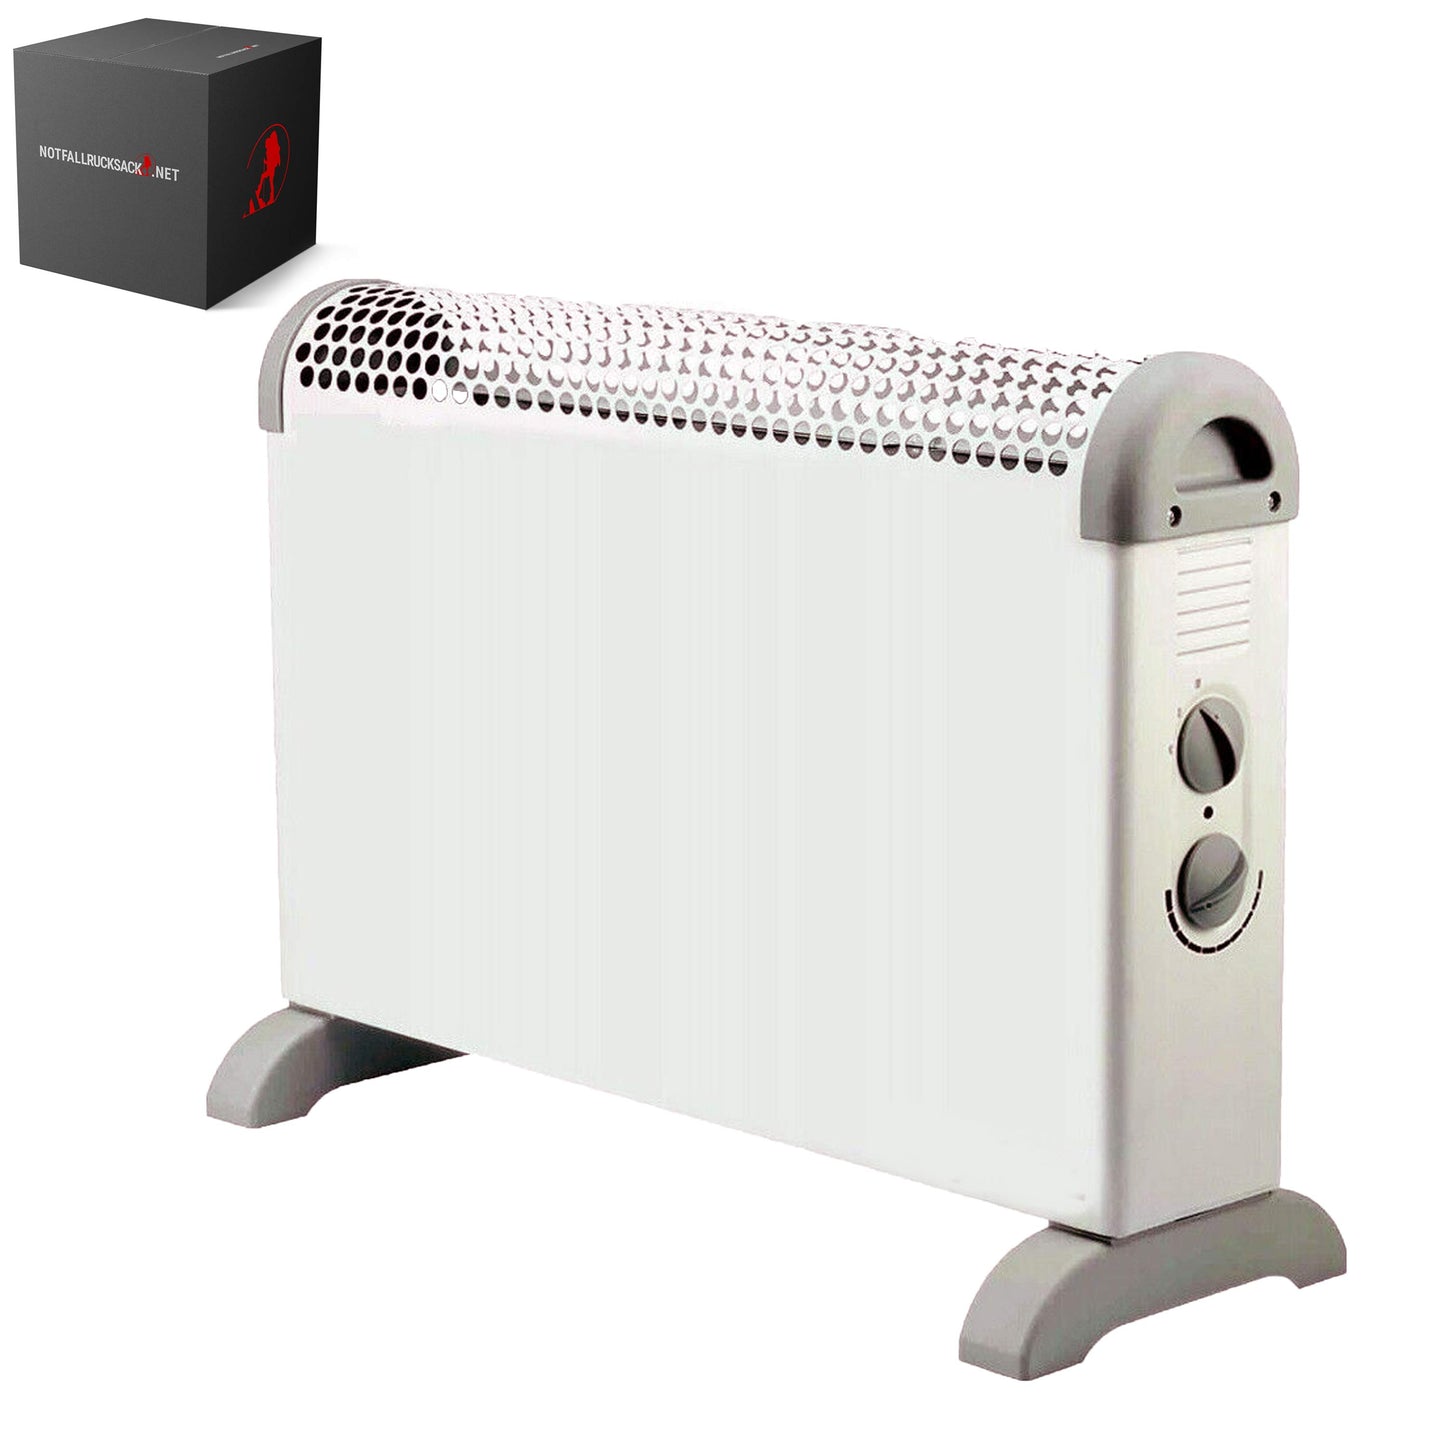 Convection heating - 1800W - heater - heat source - emergency heat/emergency heater - air flow - electric heater - emergency heater/radiators - mobile heater